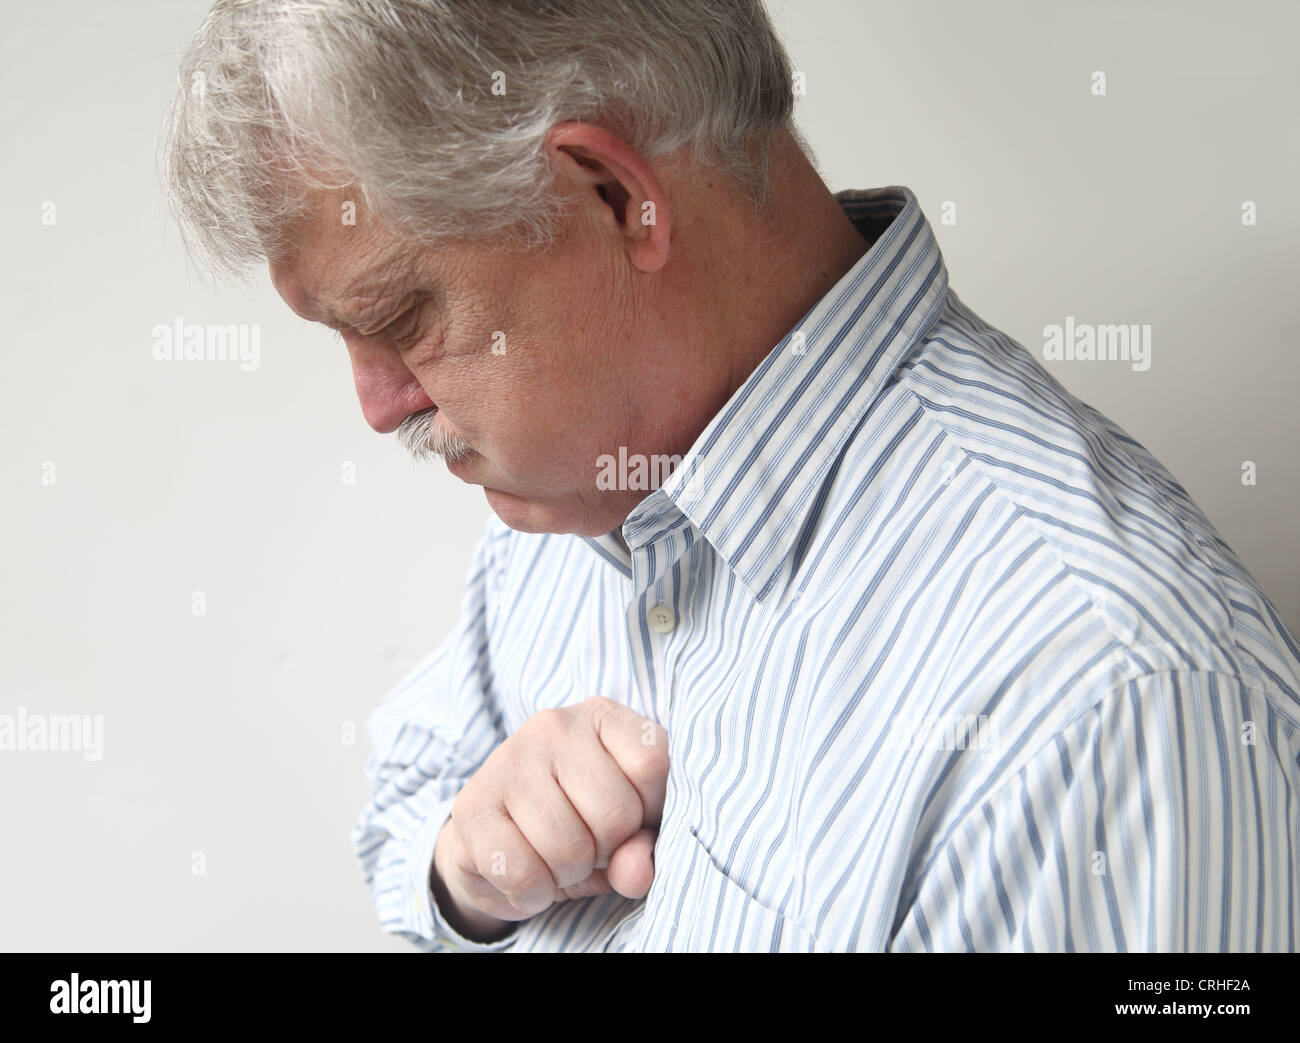 businessman with chest discomfort that could be either heartburn or a heart attack Stock Photo